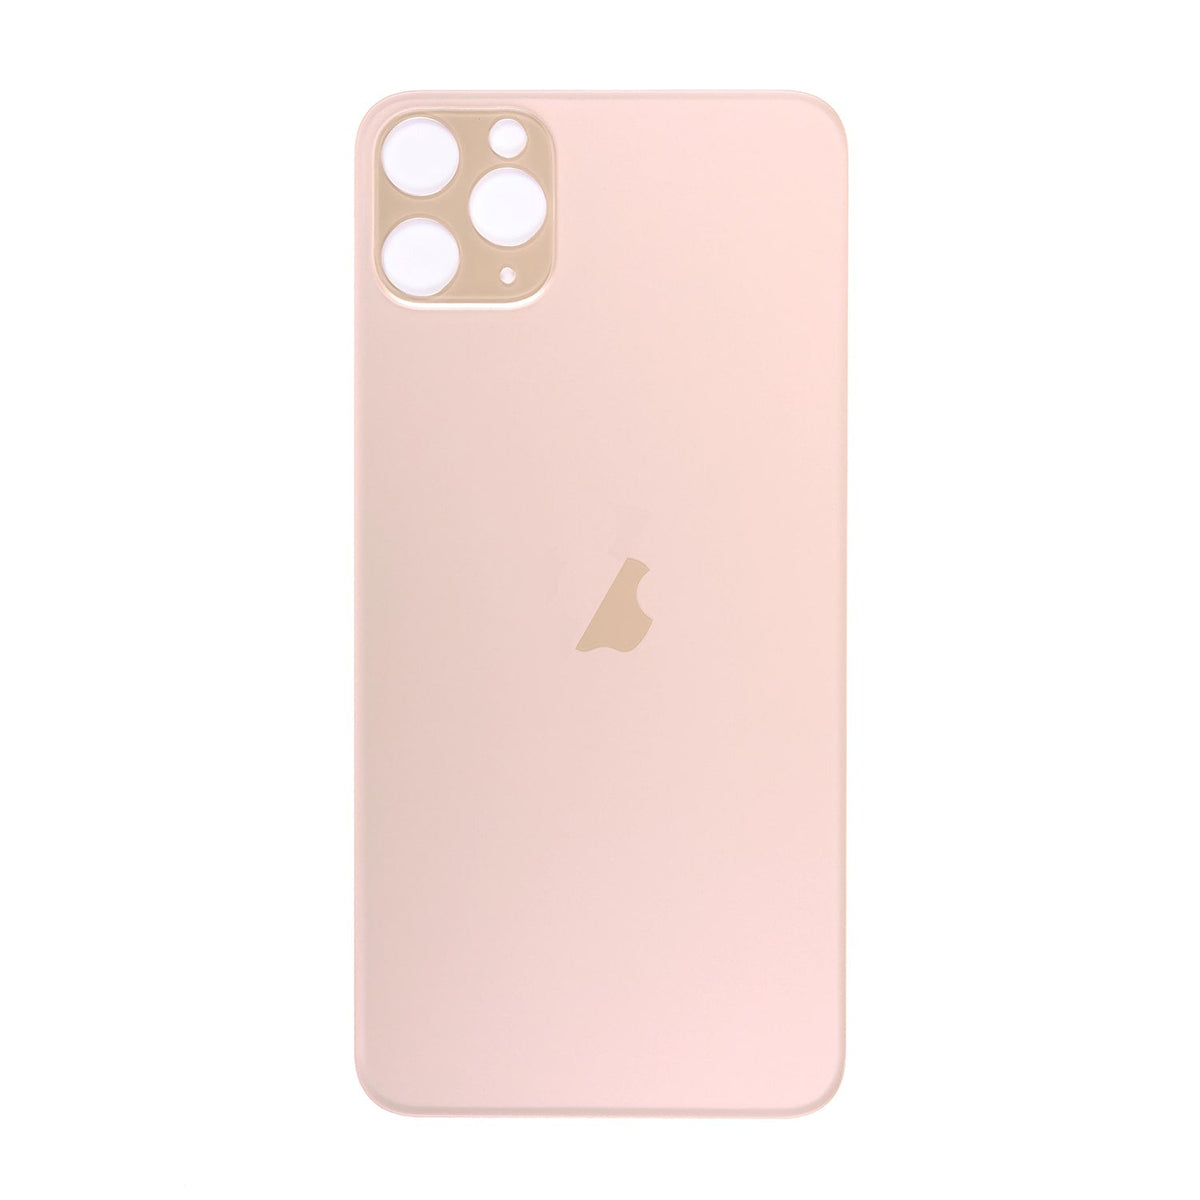 BACK COVER - GOLD FOR IPHONE 11 PRO